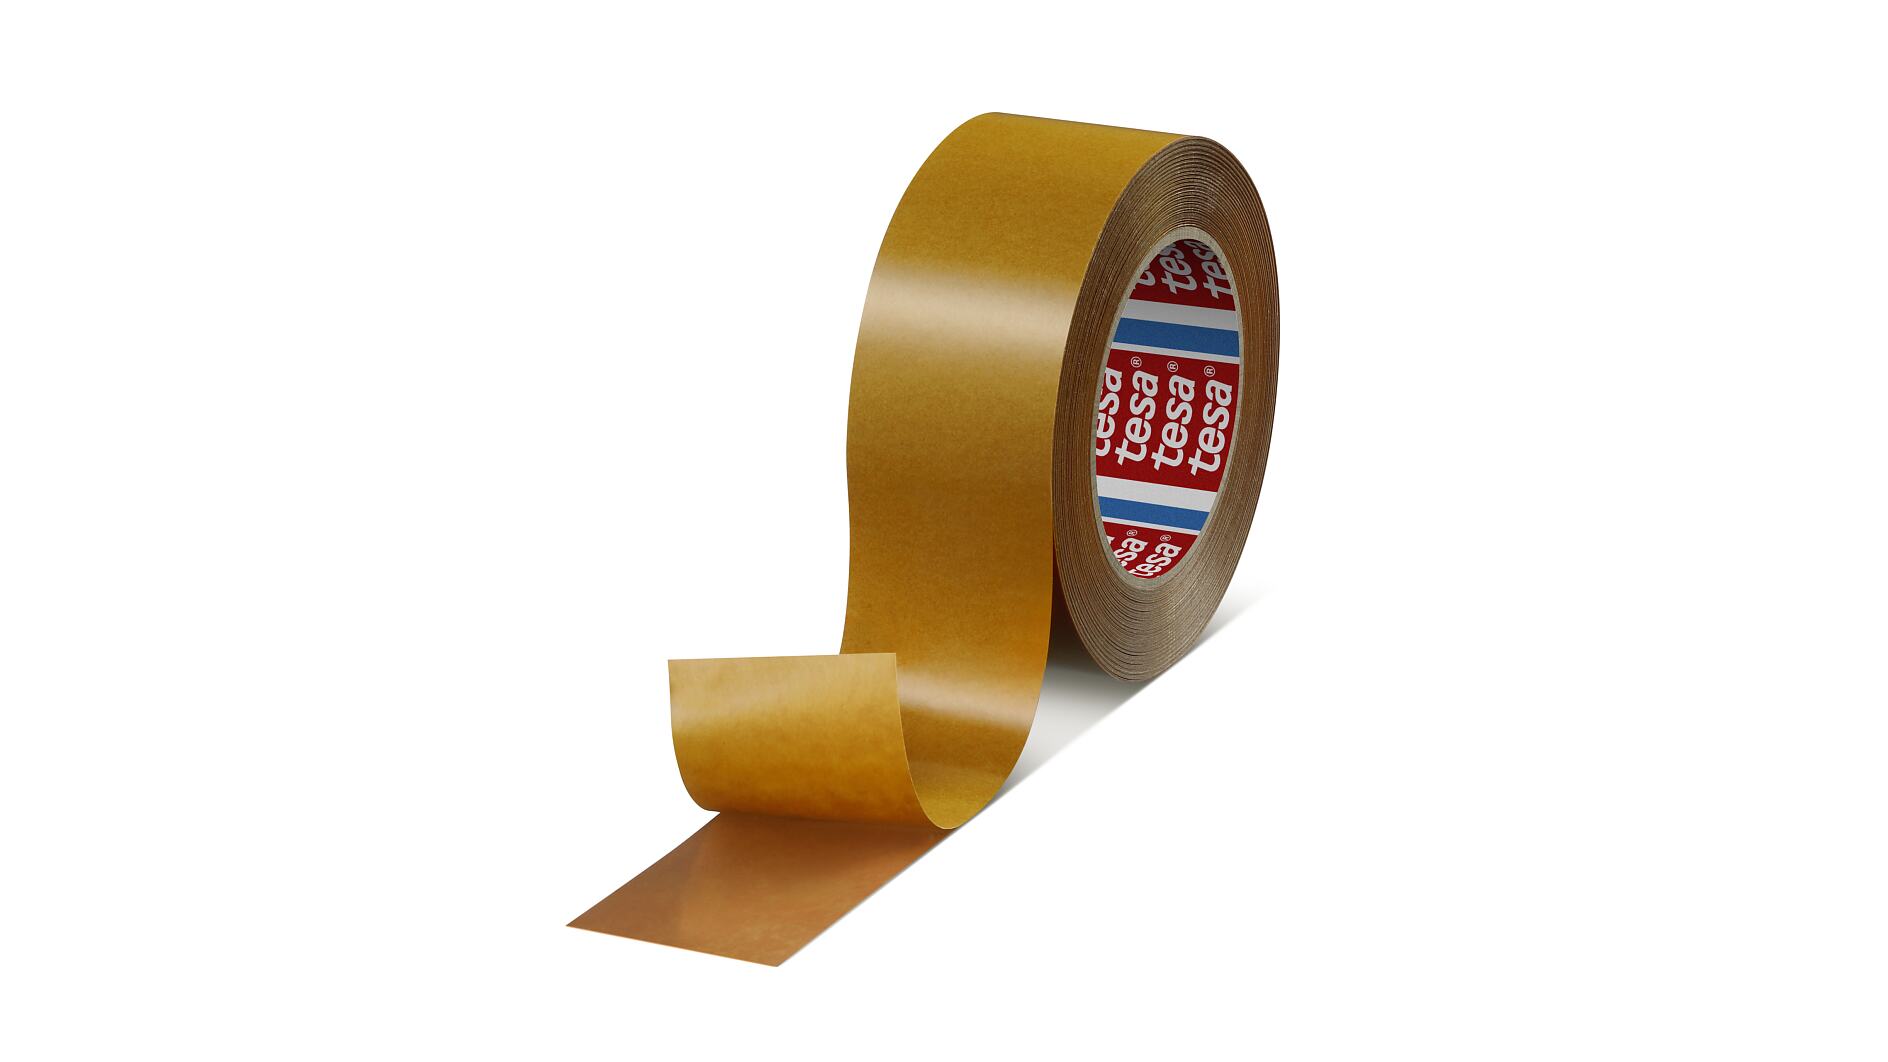 BAZIC 1 X 200 Double Sided Foam Mounting Tape Bazic Products